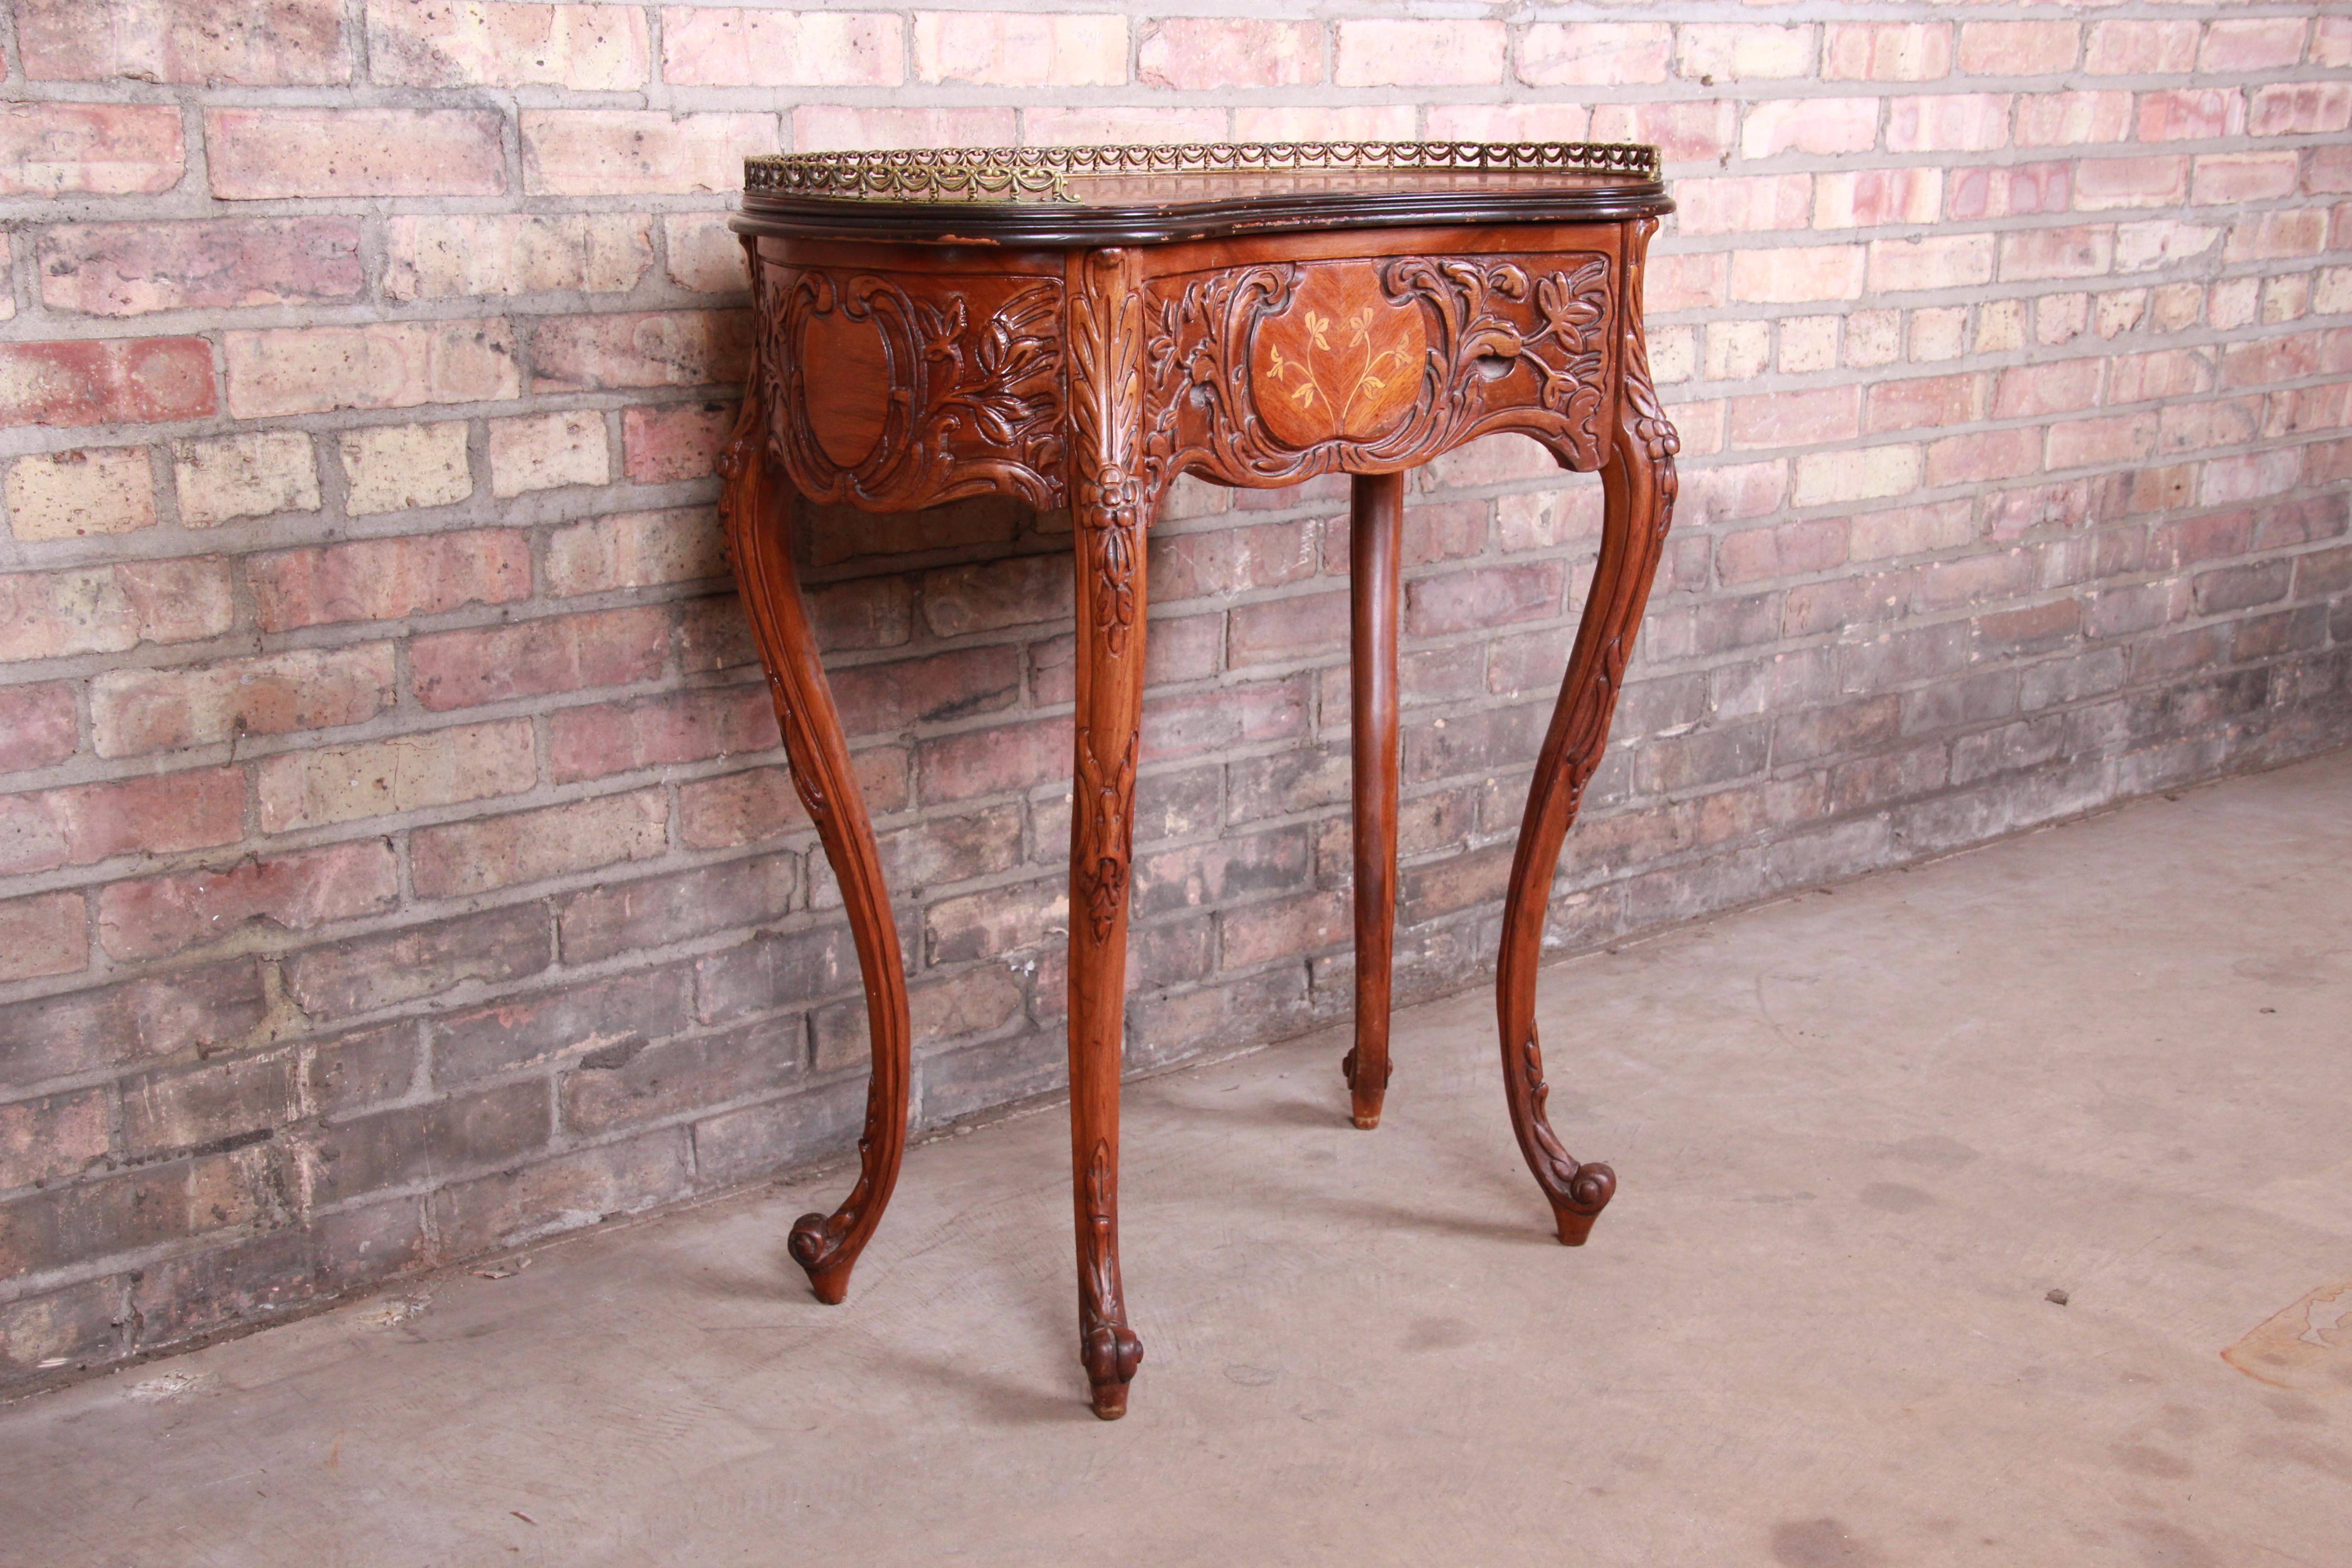 French Provincial Louis XV Inlaid Mahogany Kidney Shape Nightstand or Side Table 1